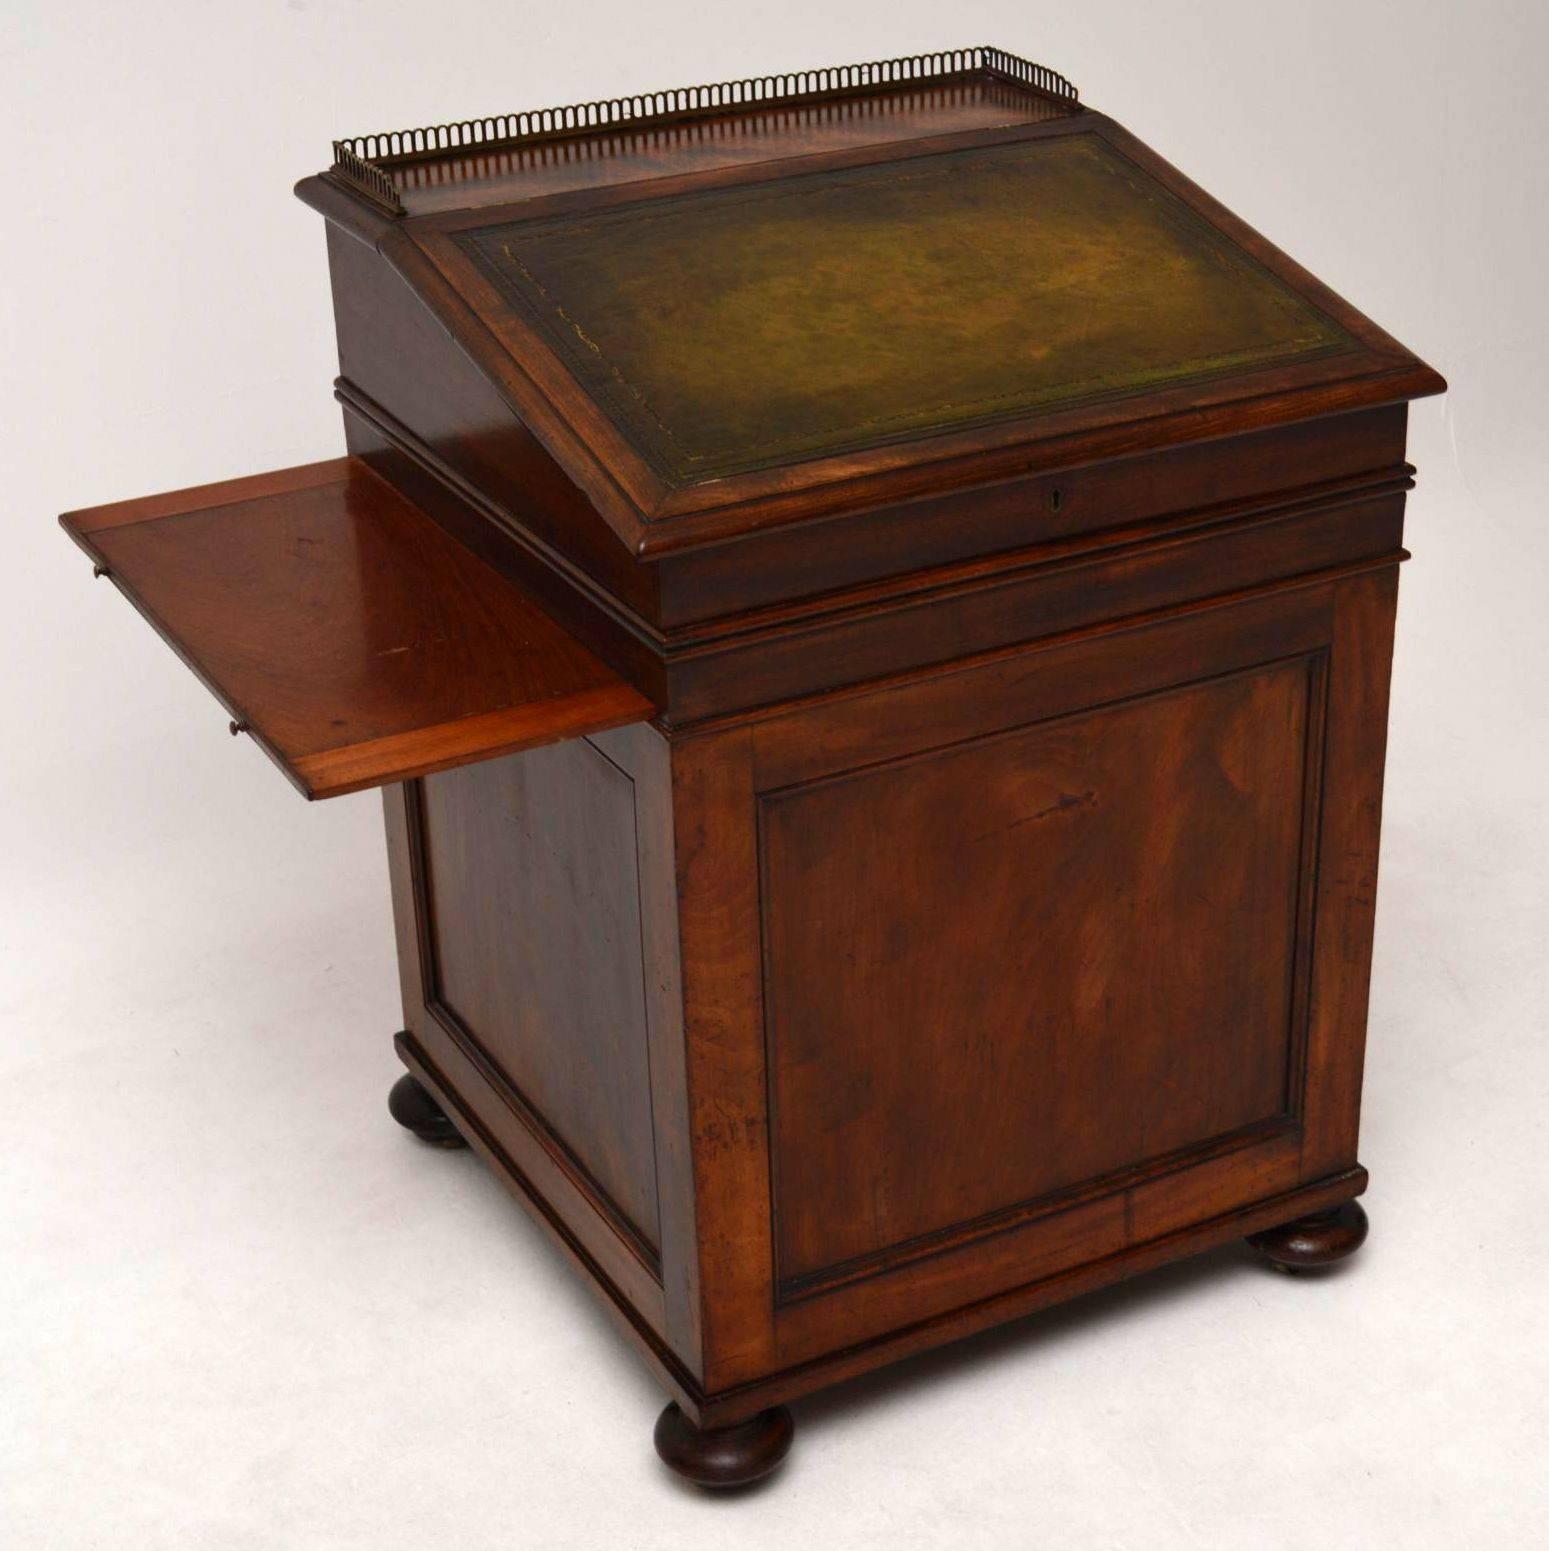 Antique William IV mahogany Davenport in good condition and of the highest quality, dating from around the 1830s-1840s period. This piece has many great features, so please enlarge all the images to see them all. Having said that, the main feature